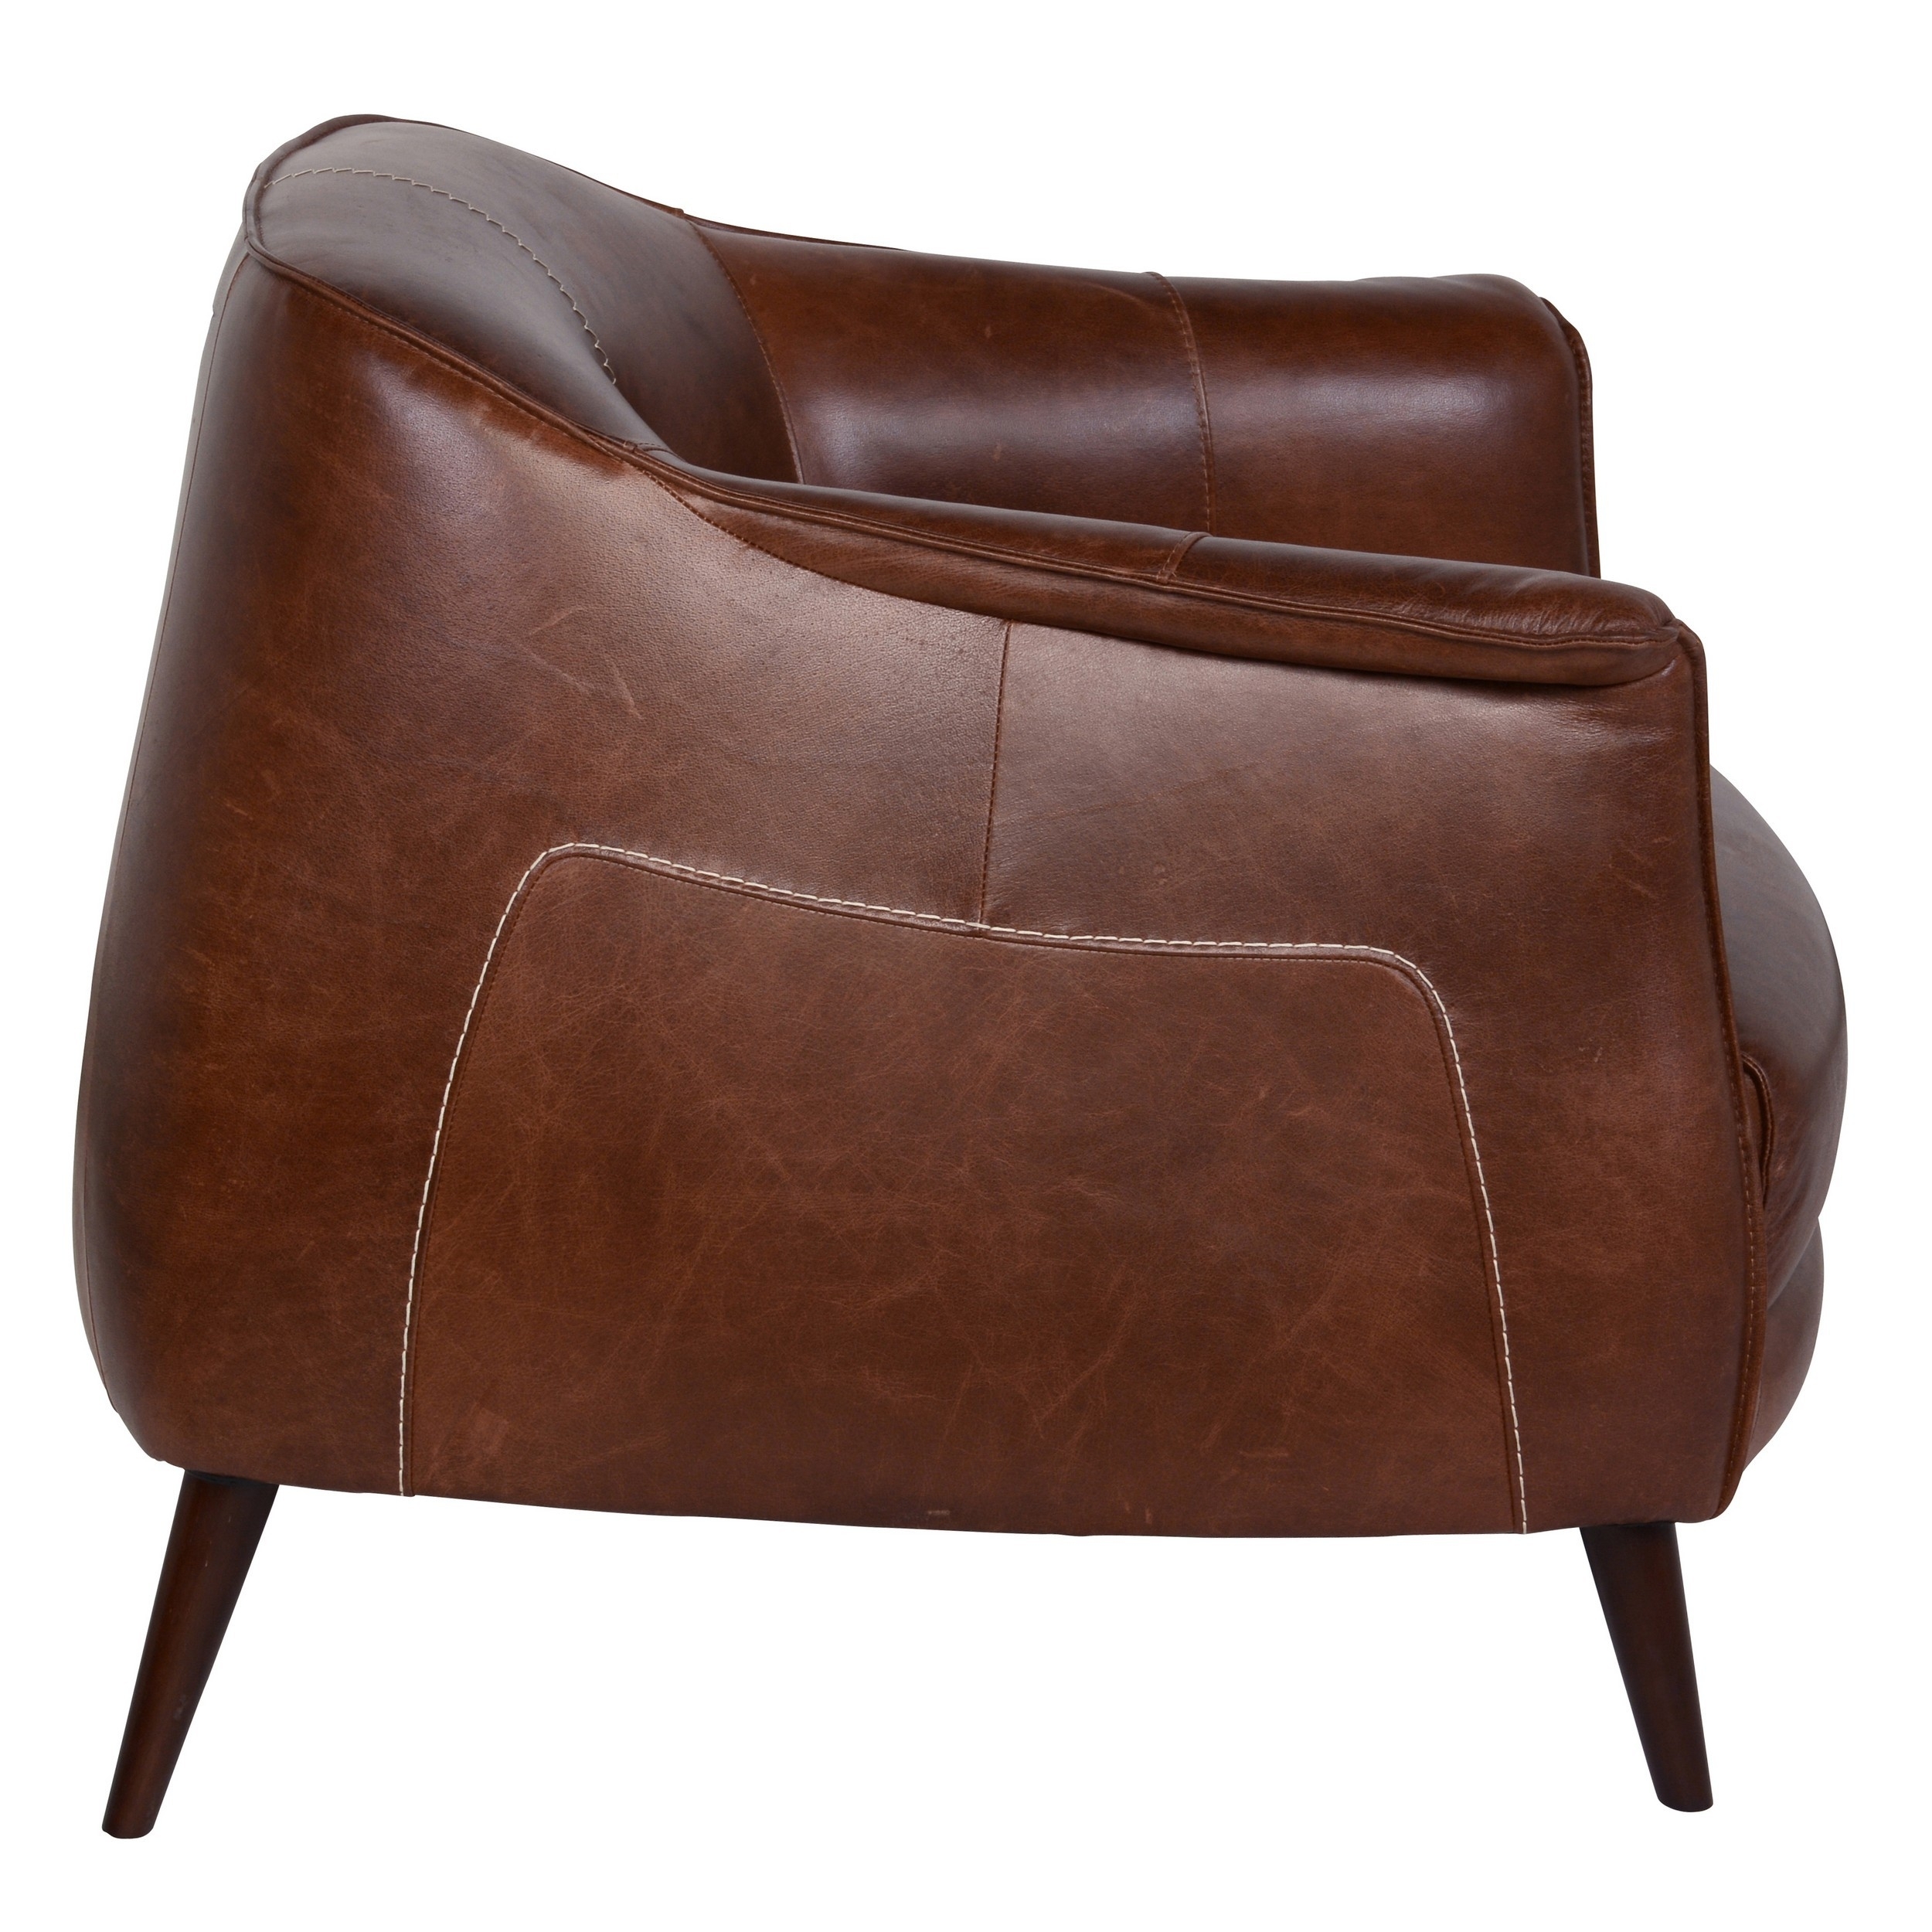 32 Inch Leather Club Accent Chair, Curved Backrest, Round Wood Legs, Brown- Saltoro Sherpi